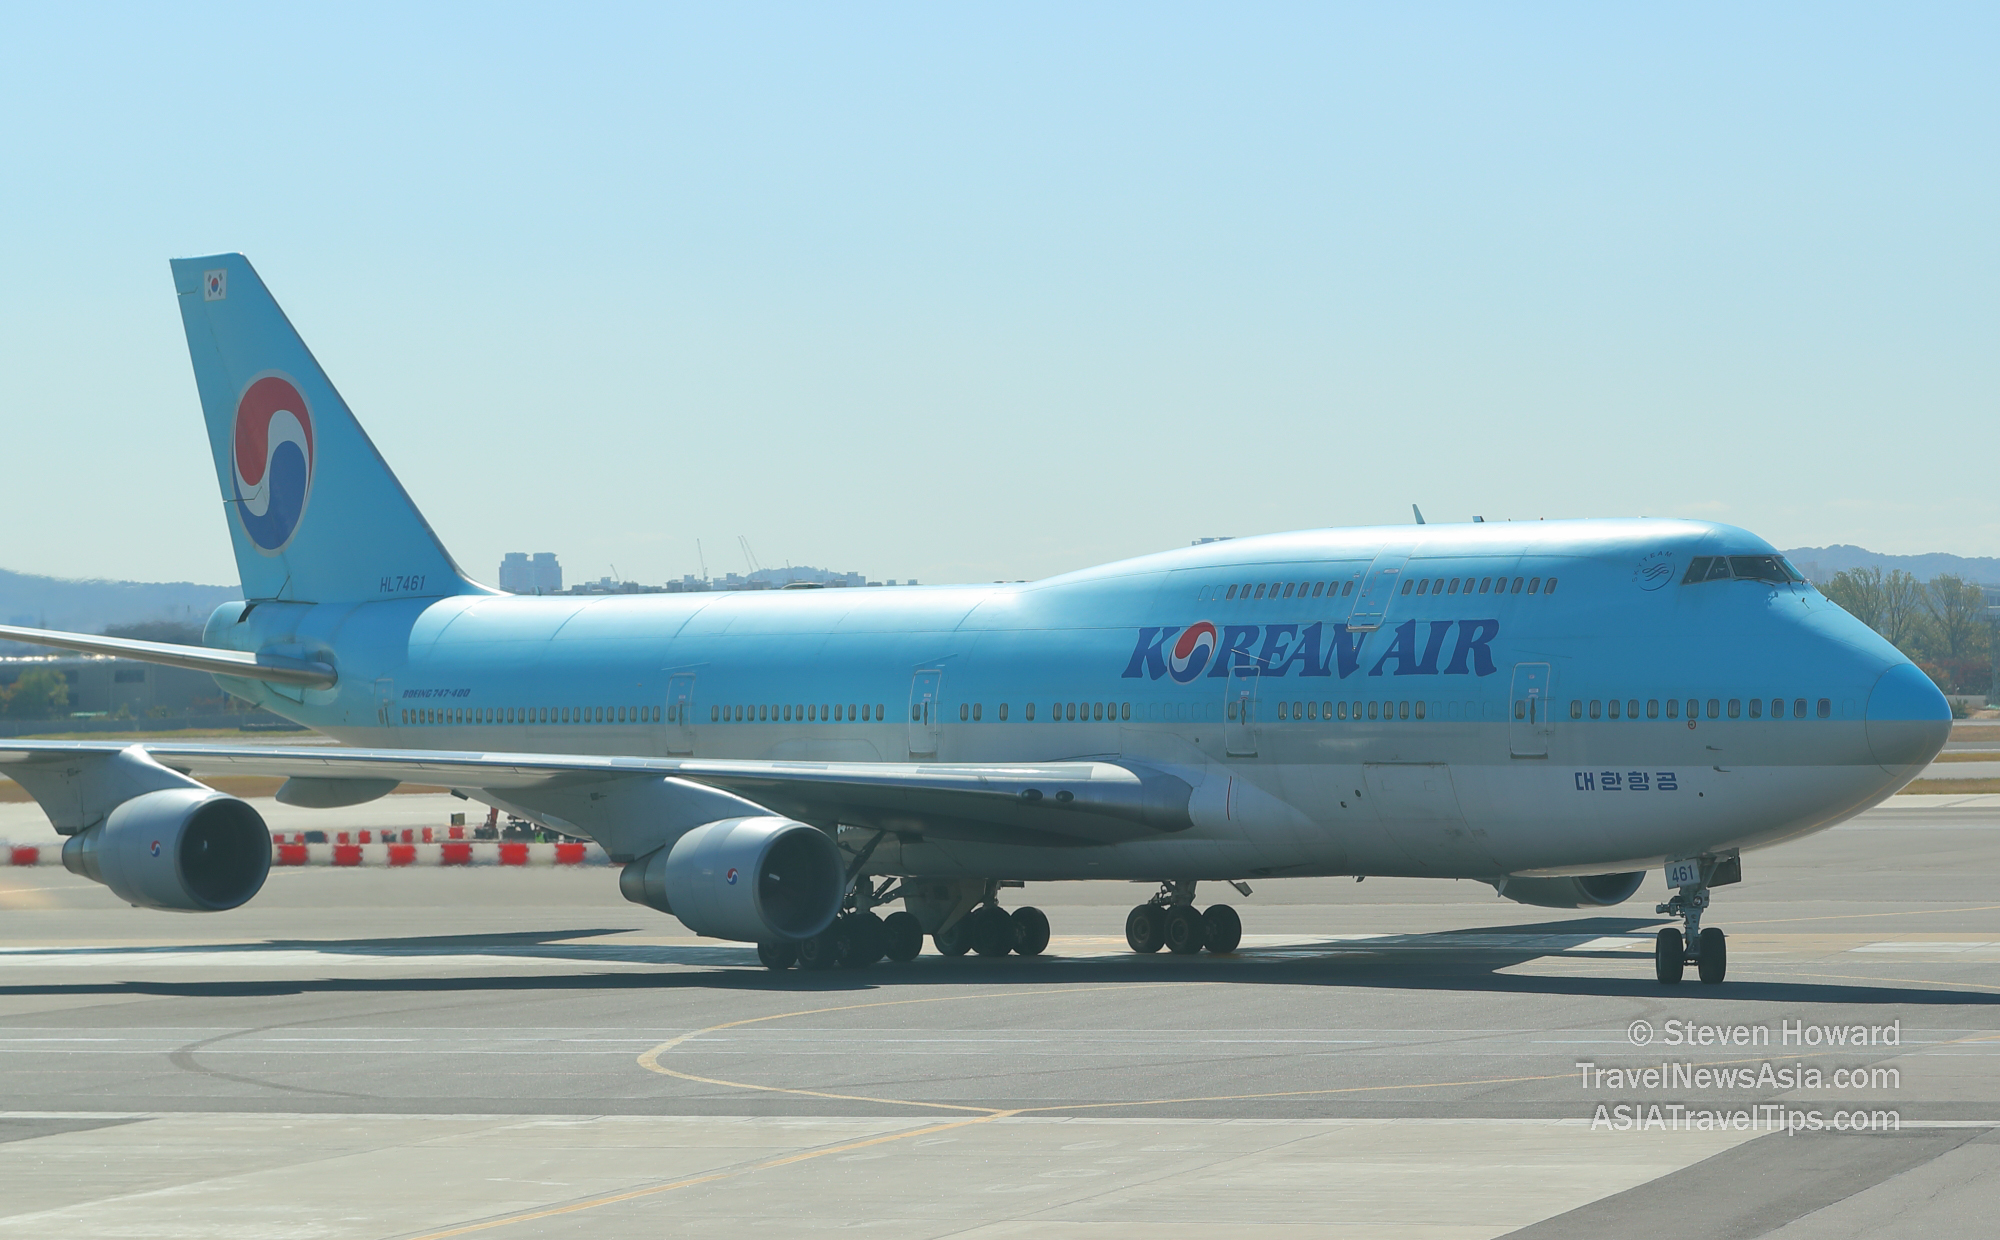 Korean Air Boeing 747-400. The Seoul - Jeju route is the busiest air route in the world by far, with 13.5 million passengers in 2017 and over 200 flights per day. Korean Air operates a number of different aircraft on the 50-minute route, even Boeing 747-400s! Picture by Steven Howard of TravelNewsAsia.com Click to enlarge.